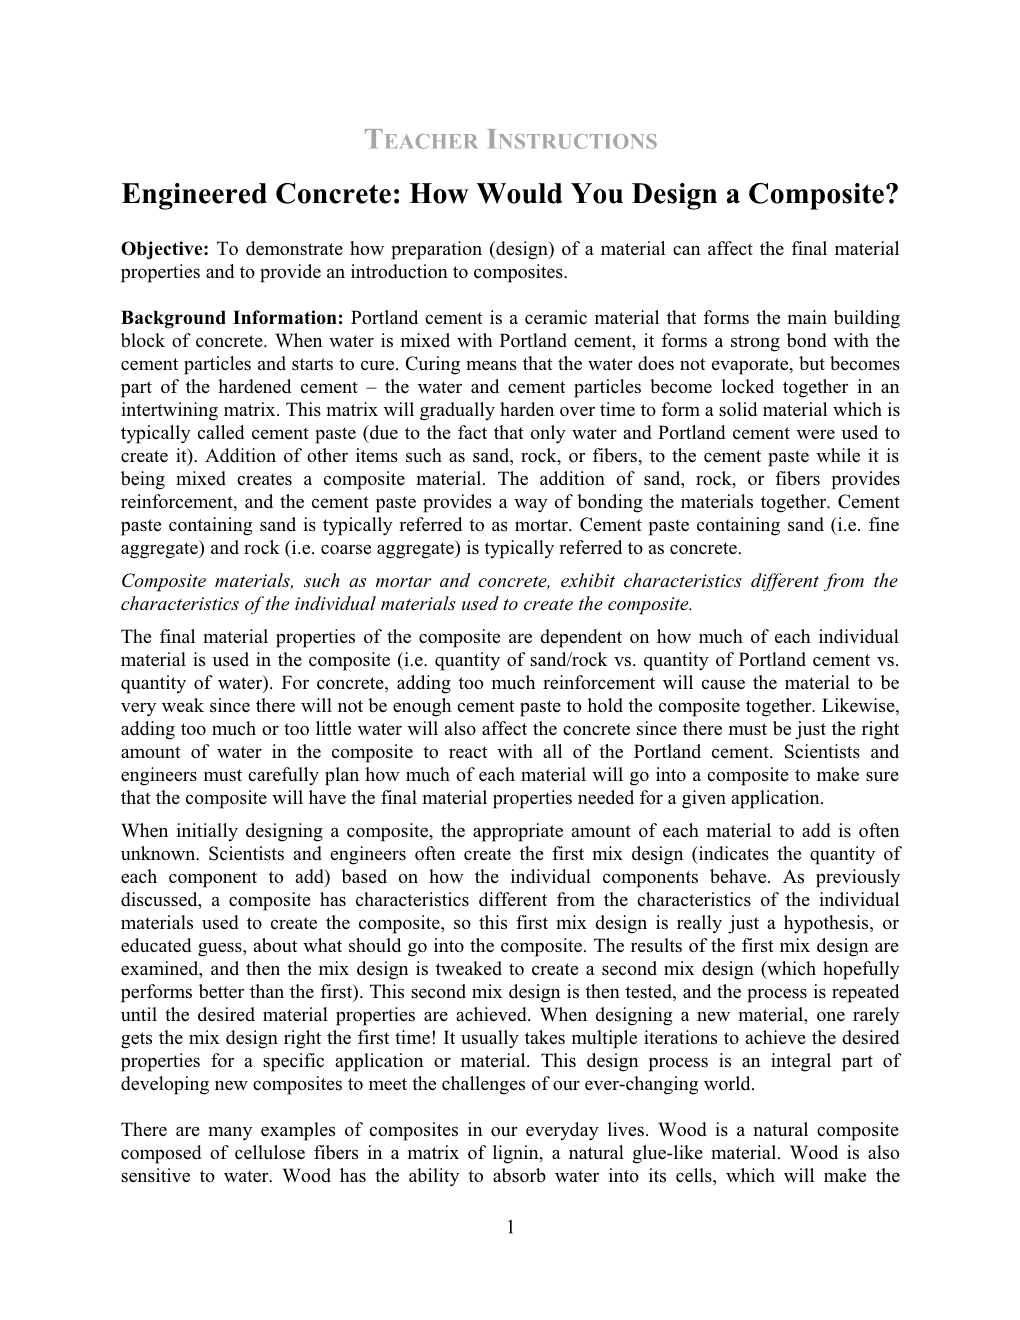 Engineered Concrete: How Would You Design a Composite?